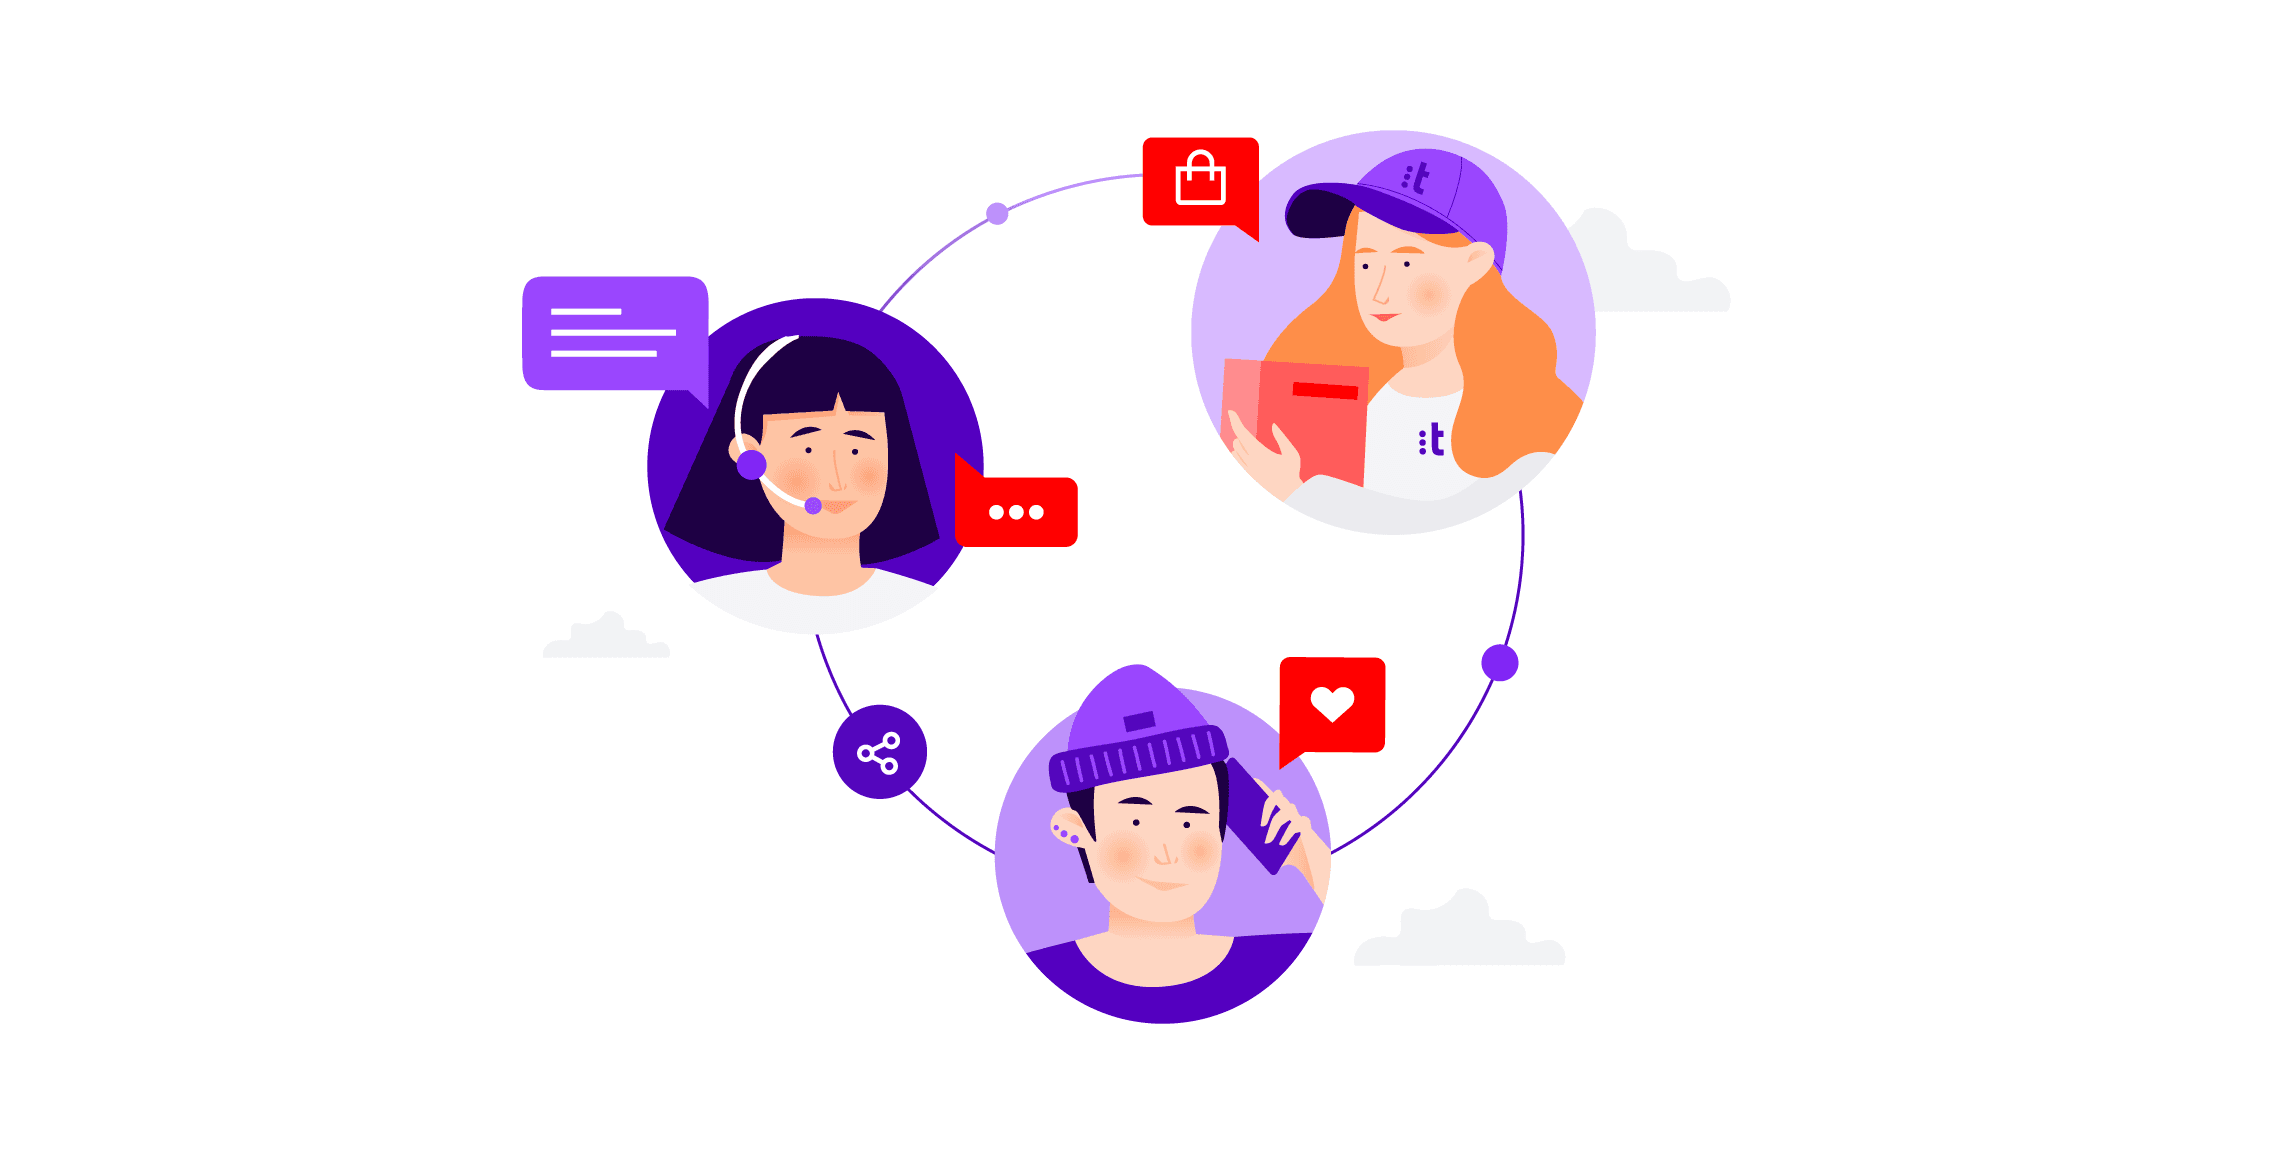 Illustrations representing two women and a man interacting through digital and phone channels